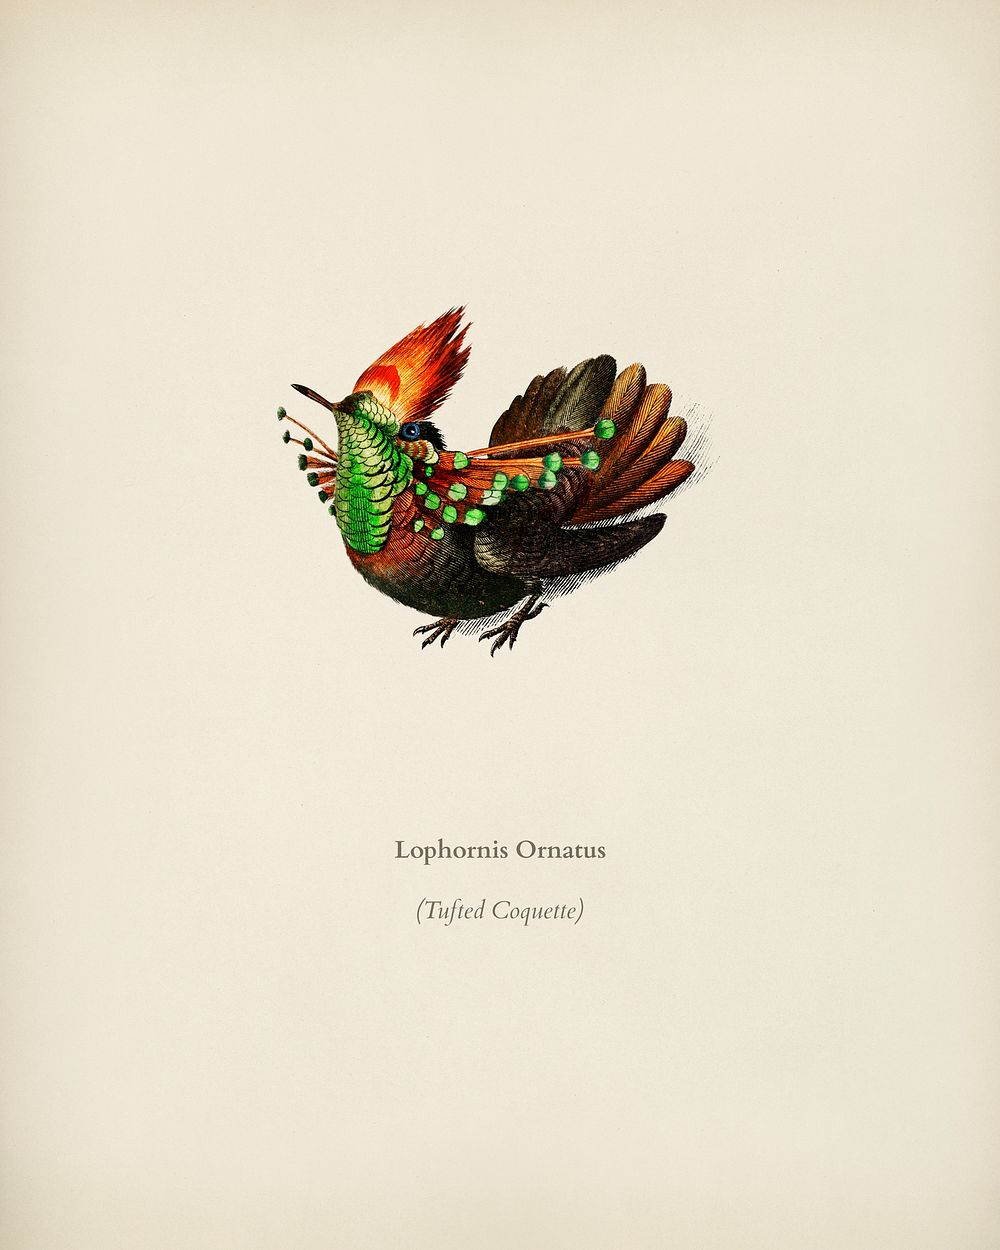 Tufted Coquette (Lophornis Ornatus) illustrated by Charles Dessalines D' Orbigny (1806-1876). Digitally enhanced from our…